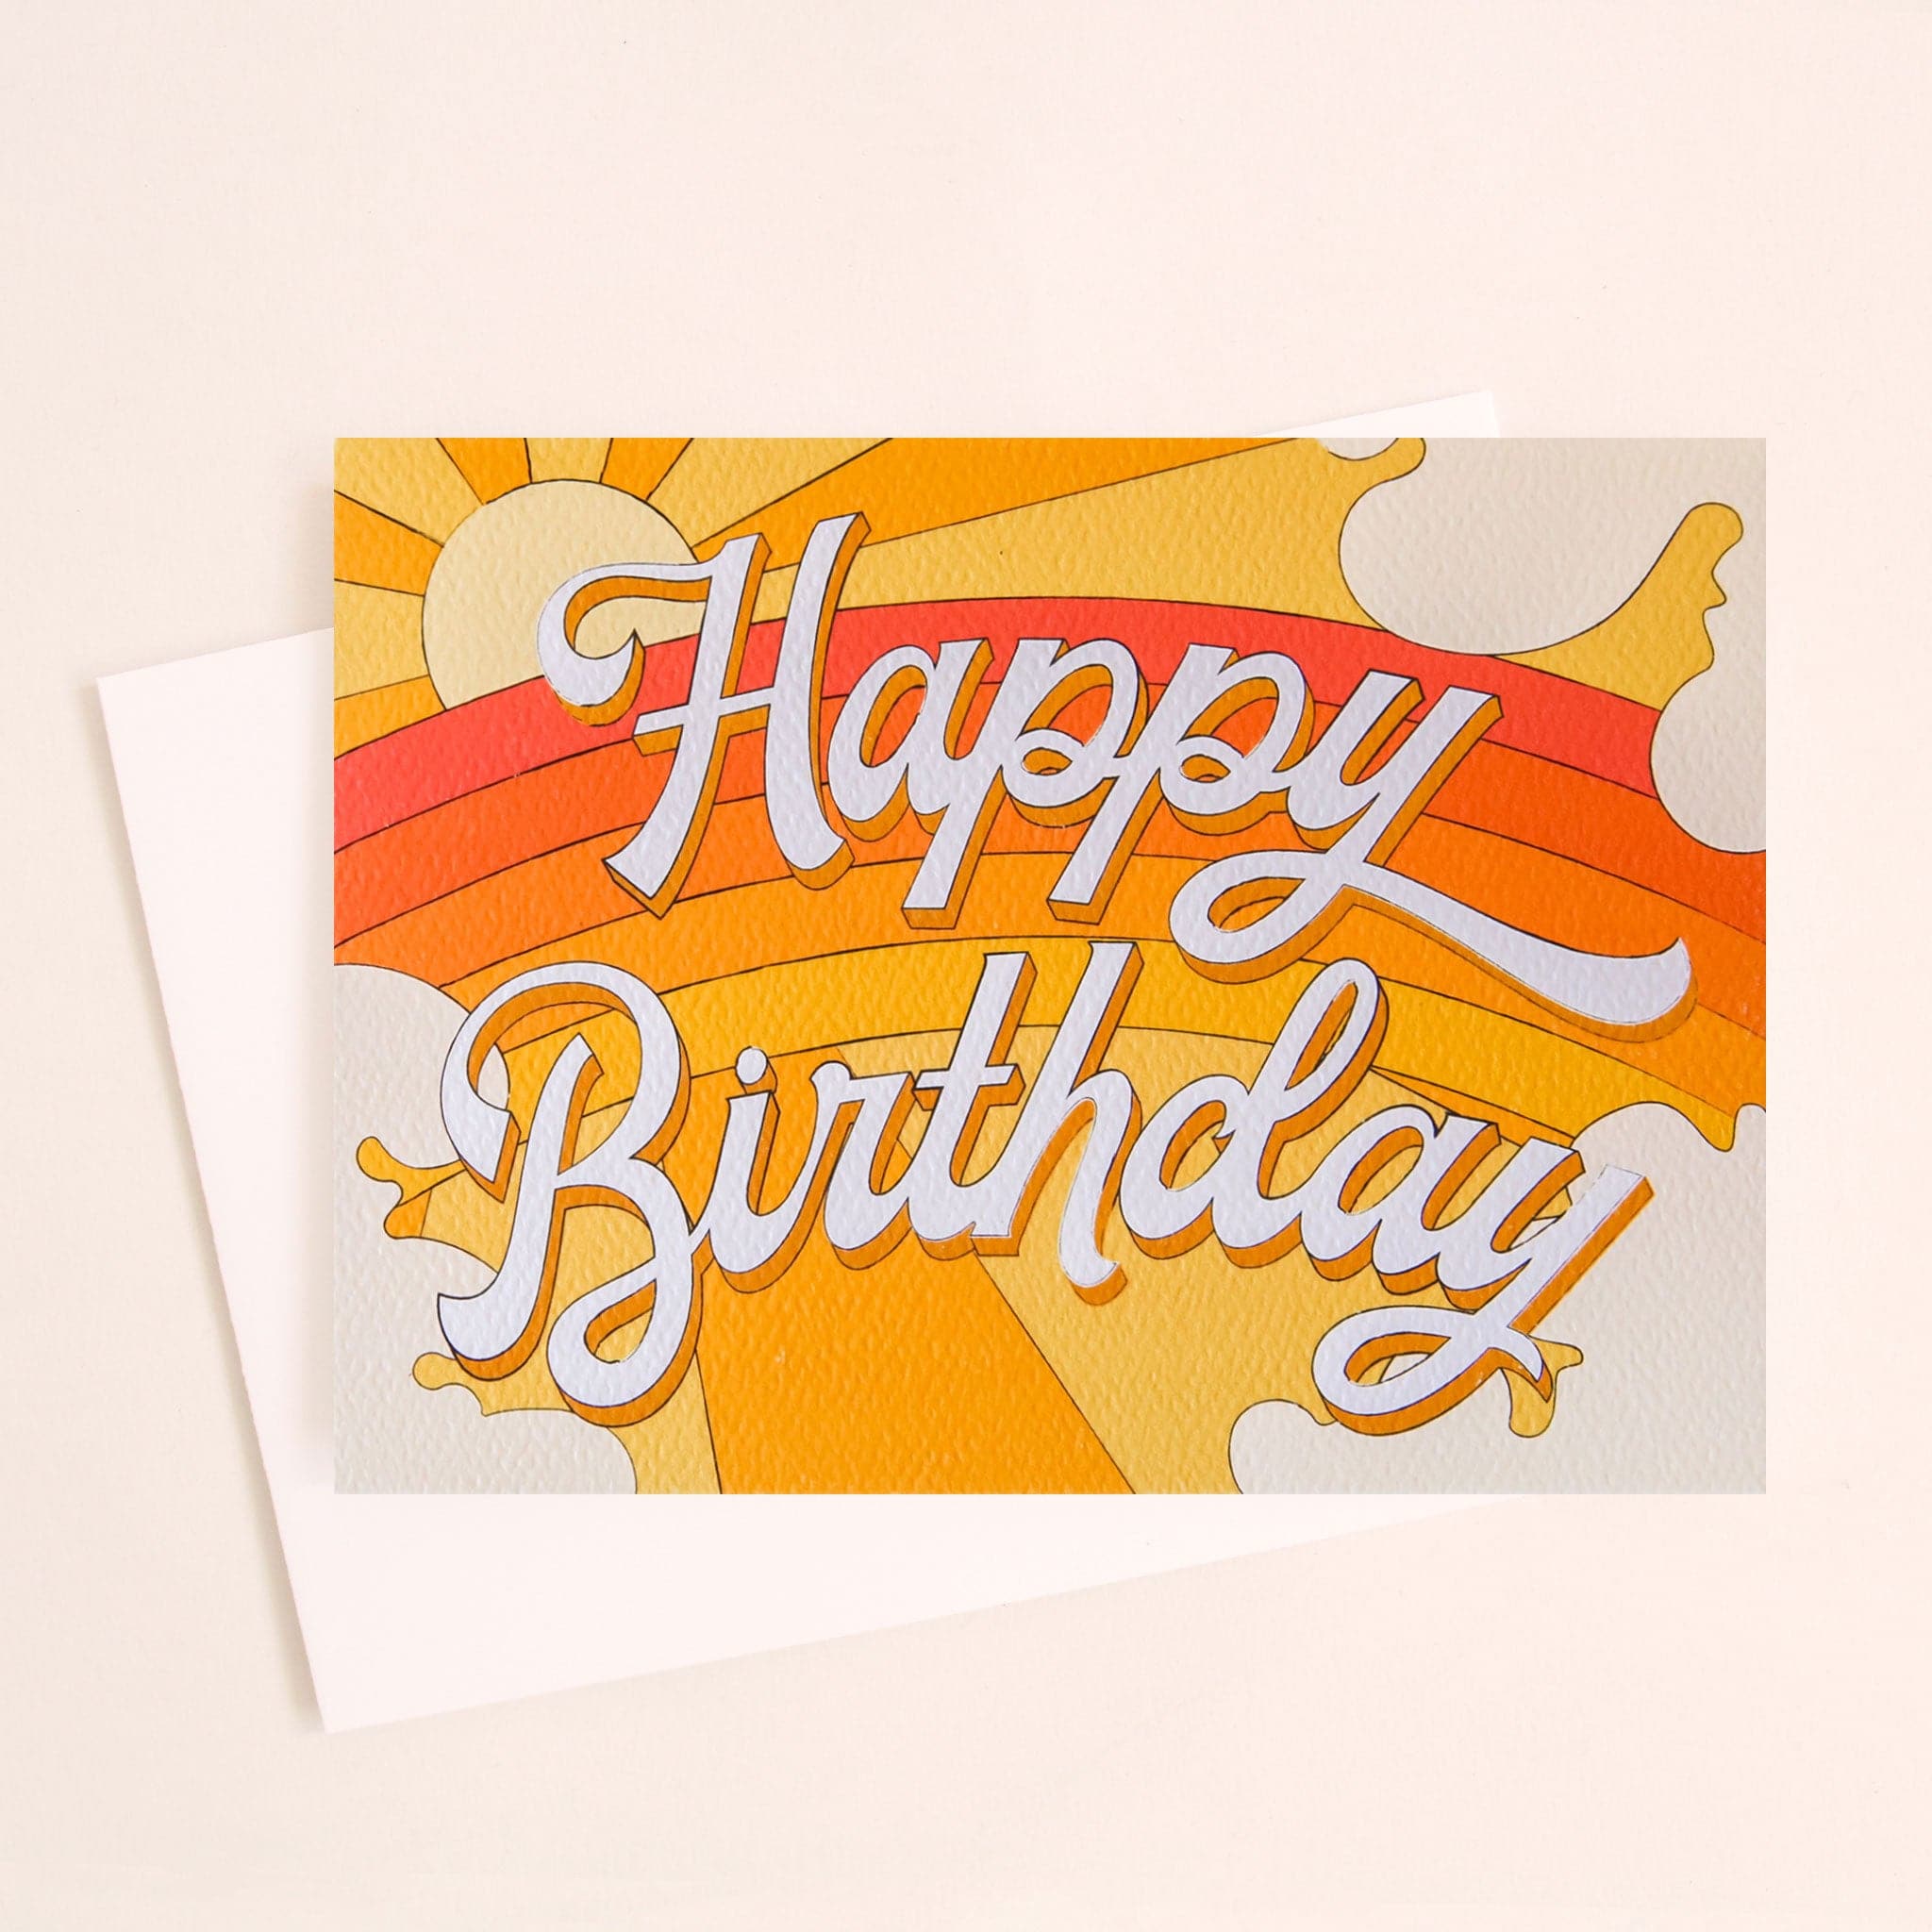 A folded card that has a rainbow graphic made with shades of yellow, orange and red along with text that reads, "Happy Birthday" in white letters across the front.